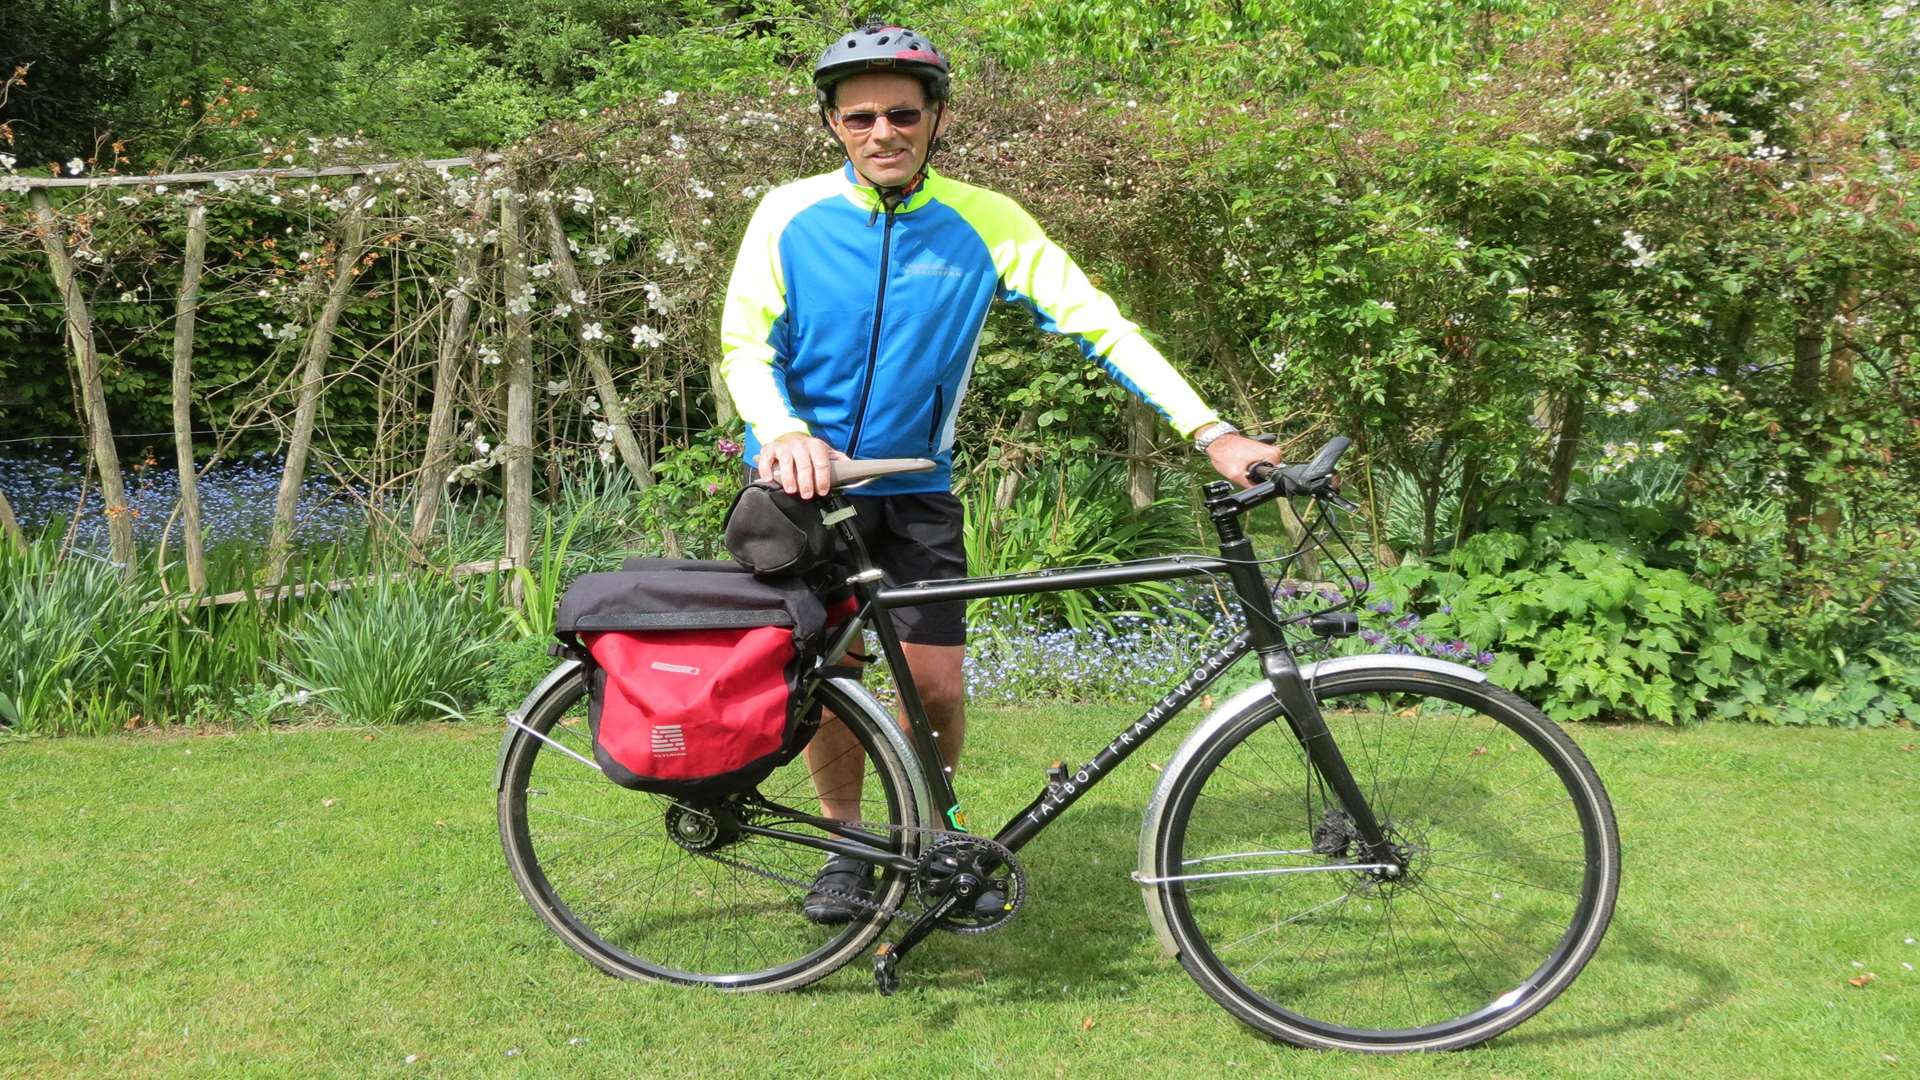 Deryck Goodman, cycling 100 miles for Citizens Advice